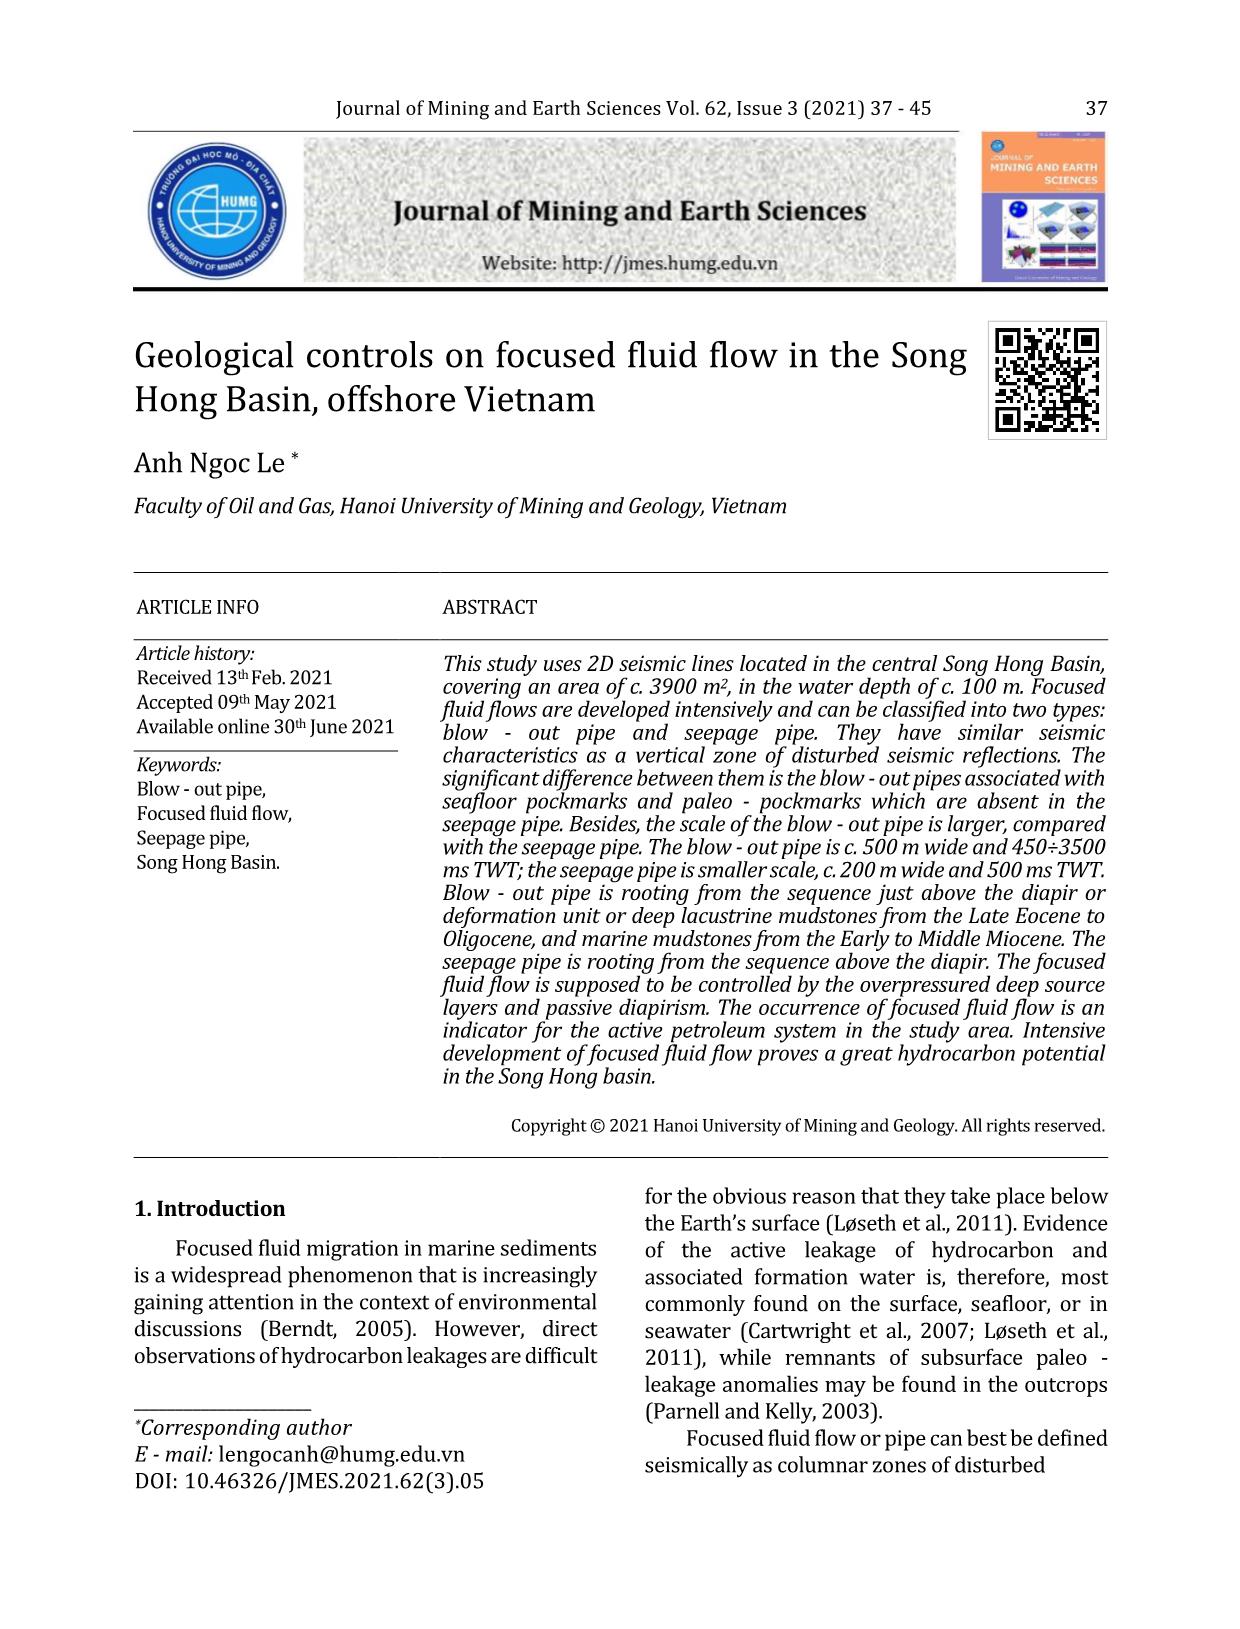 Geological controls on focused fluid flow in the Song Hong Basin, offshore Vietnam trang 1